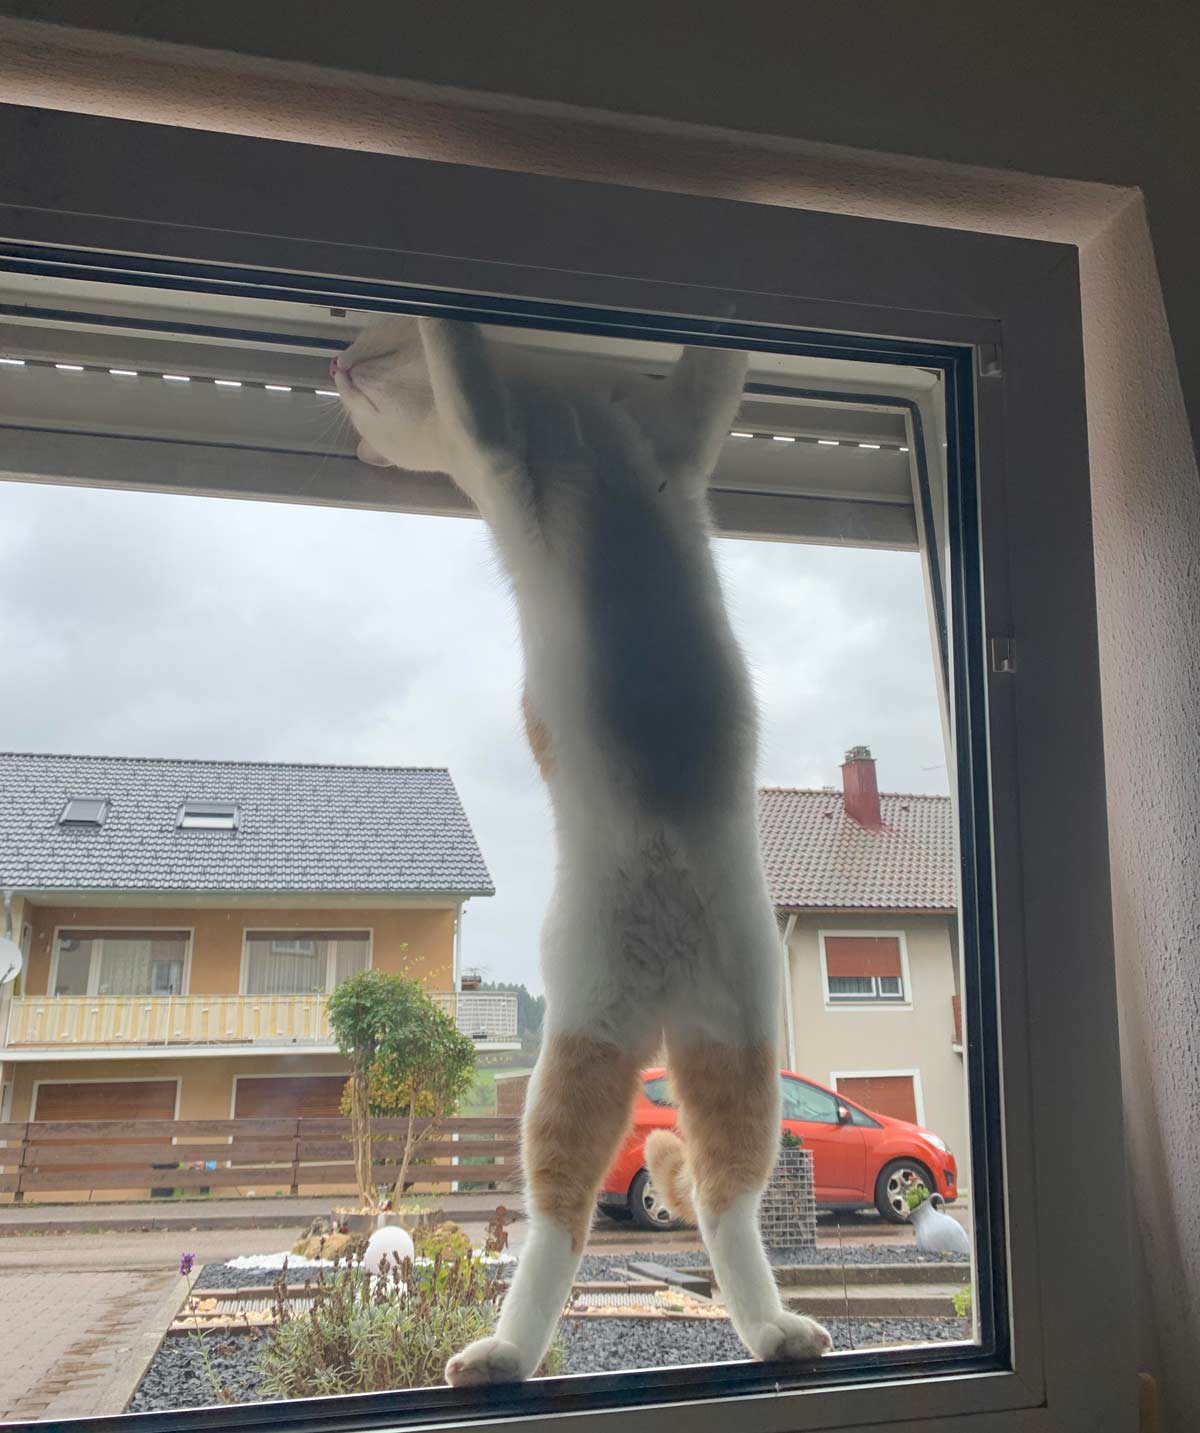 My neighbor's cat is trying to break into my house